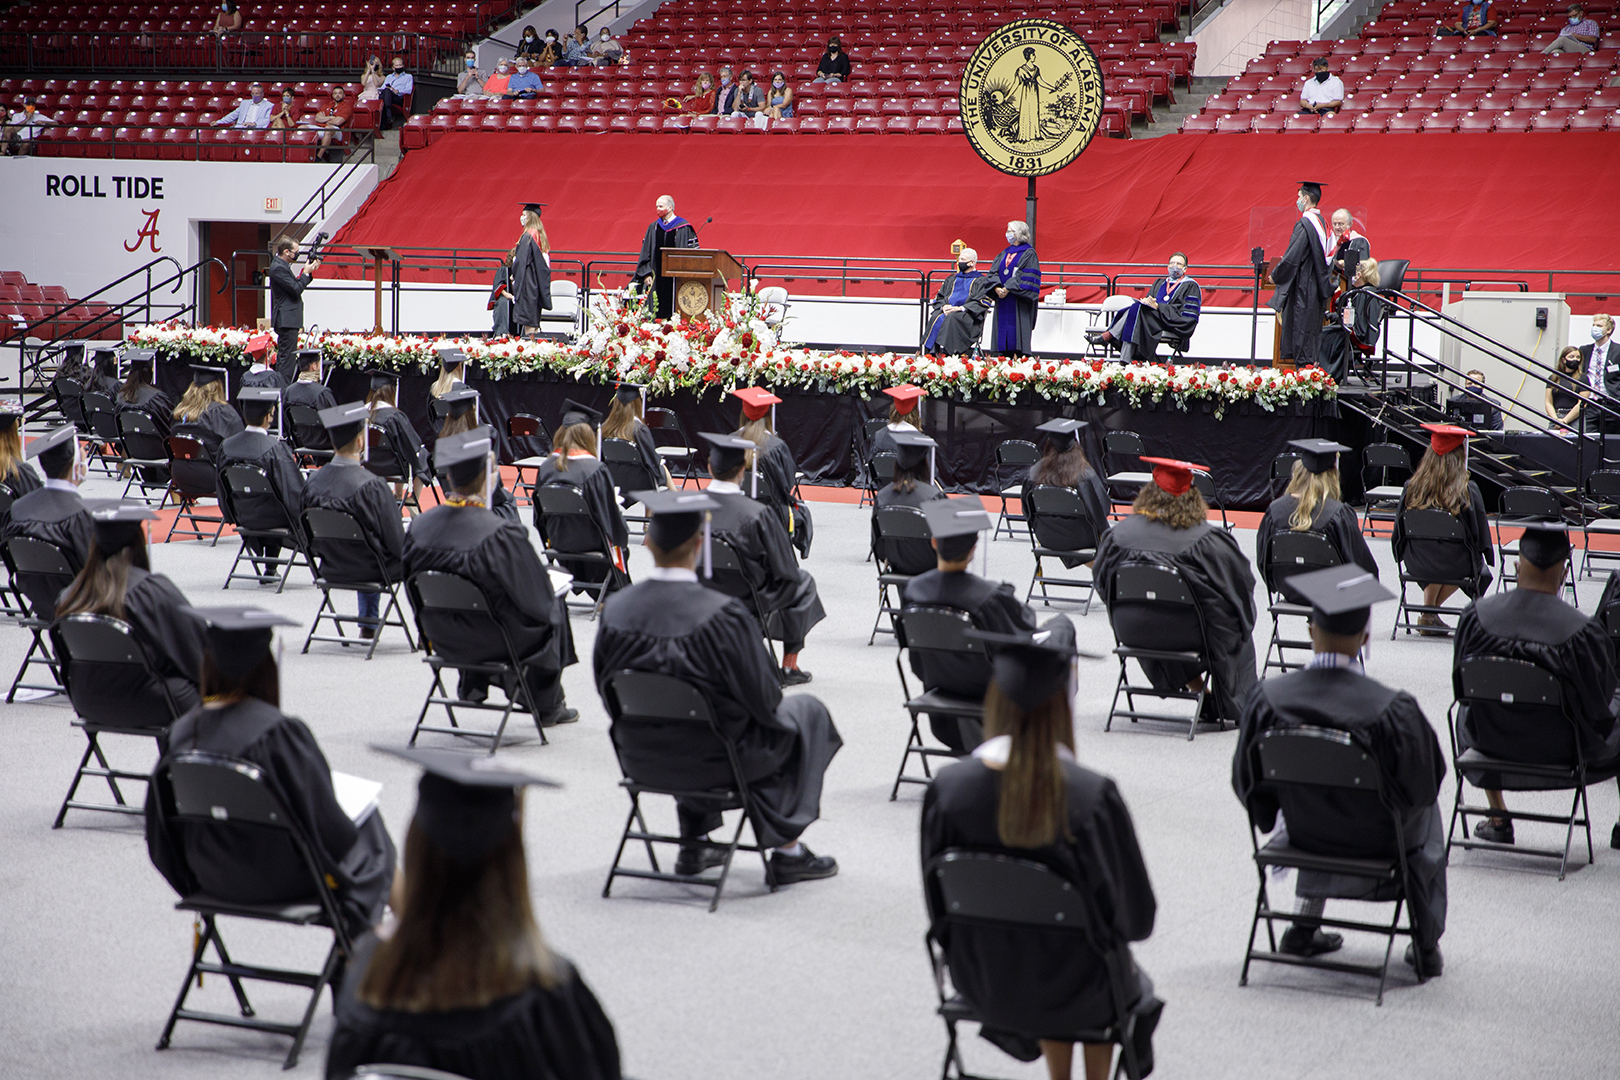 Students sit in cap and gown at commencement ceremony.